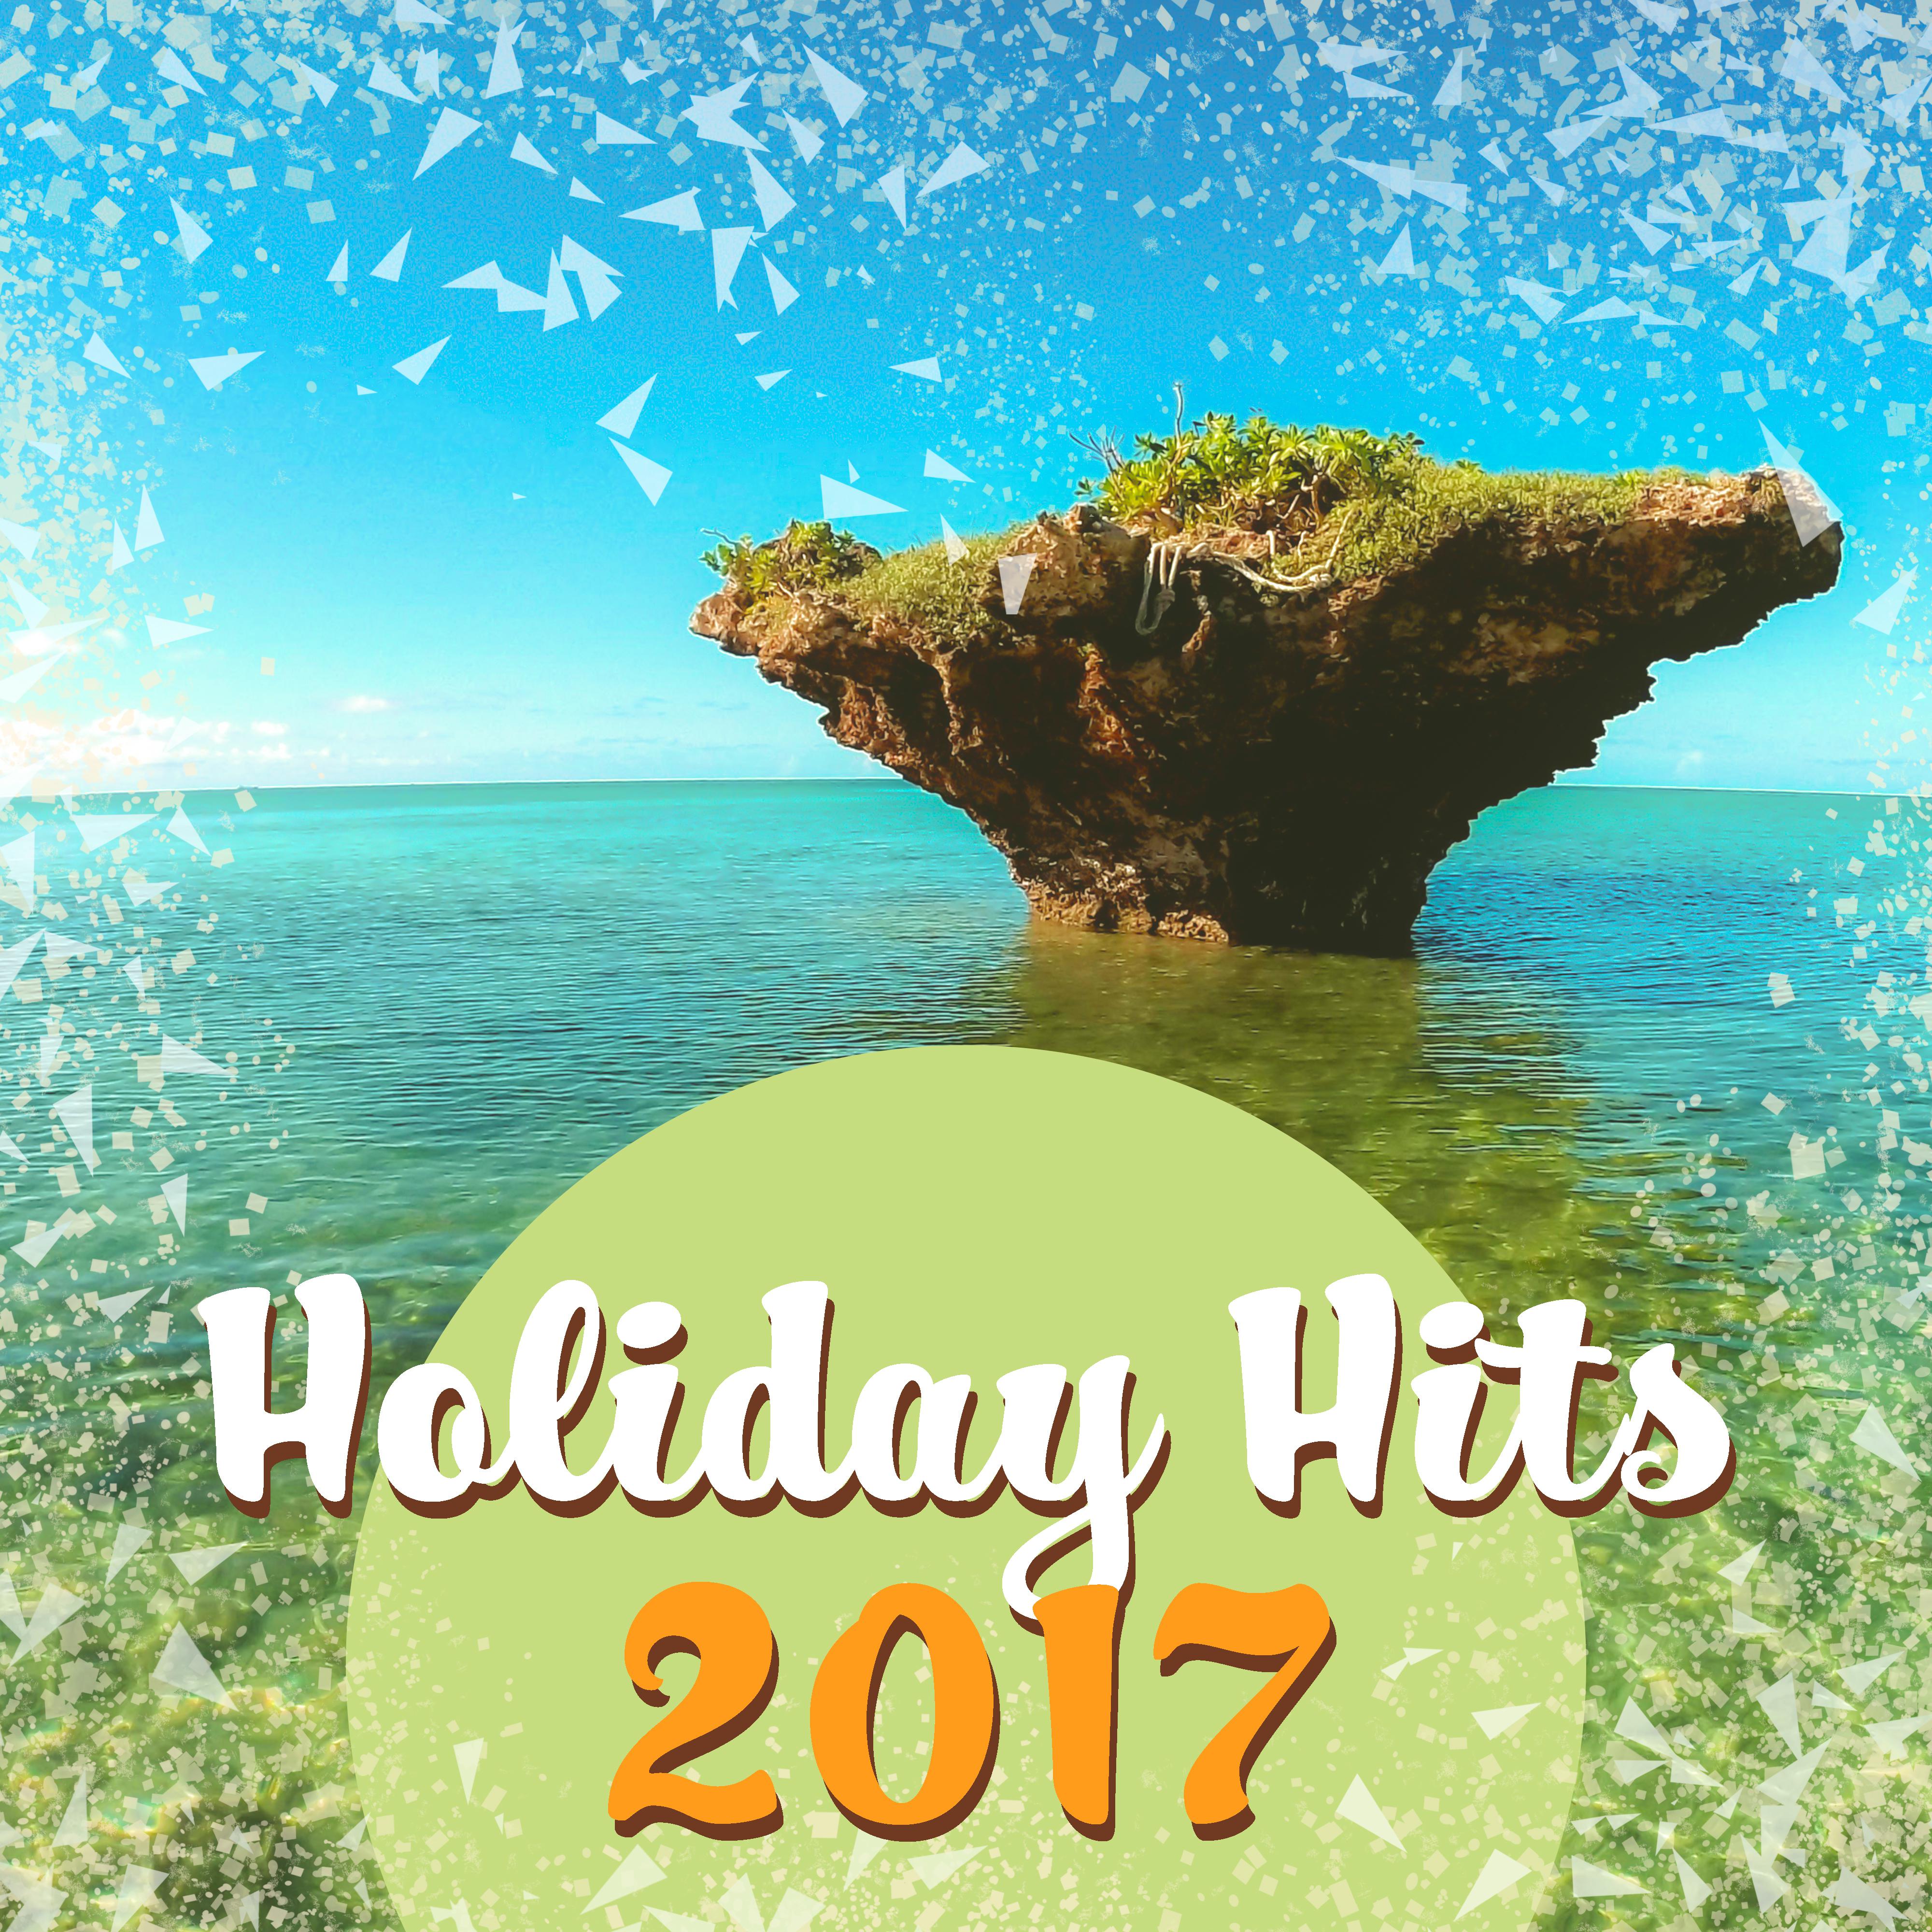 Holiday Hits 2017 – **** Vibes, Dance Party, Electronic Beats, Summer Chill, Party Night, Relax, Ibiza Lounge